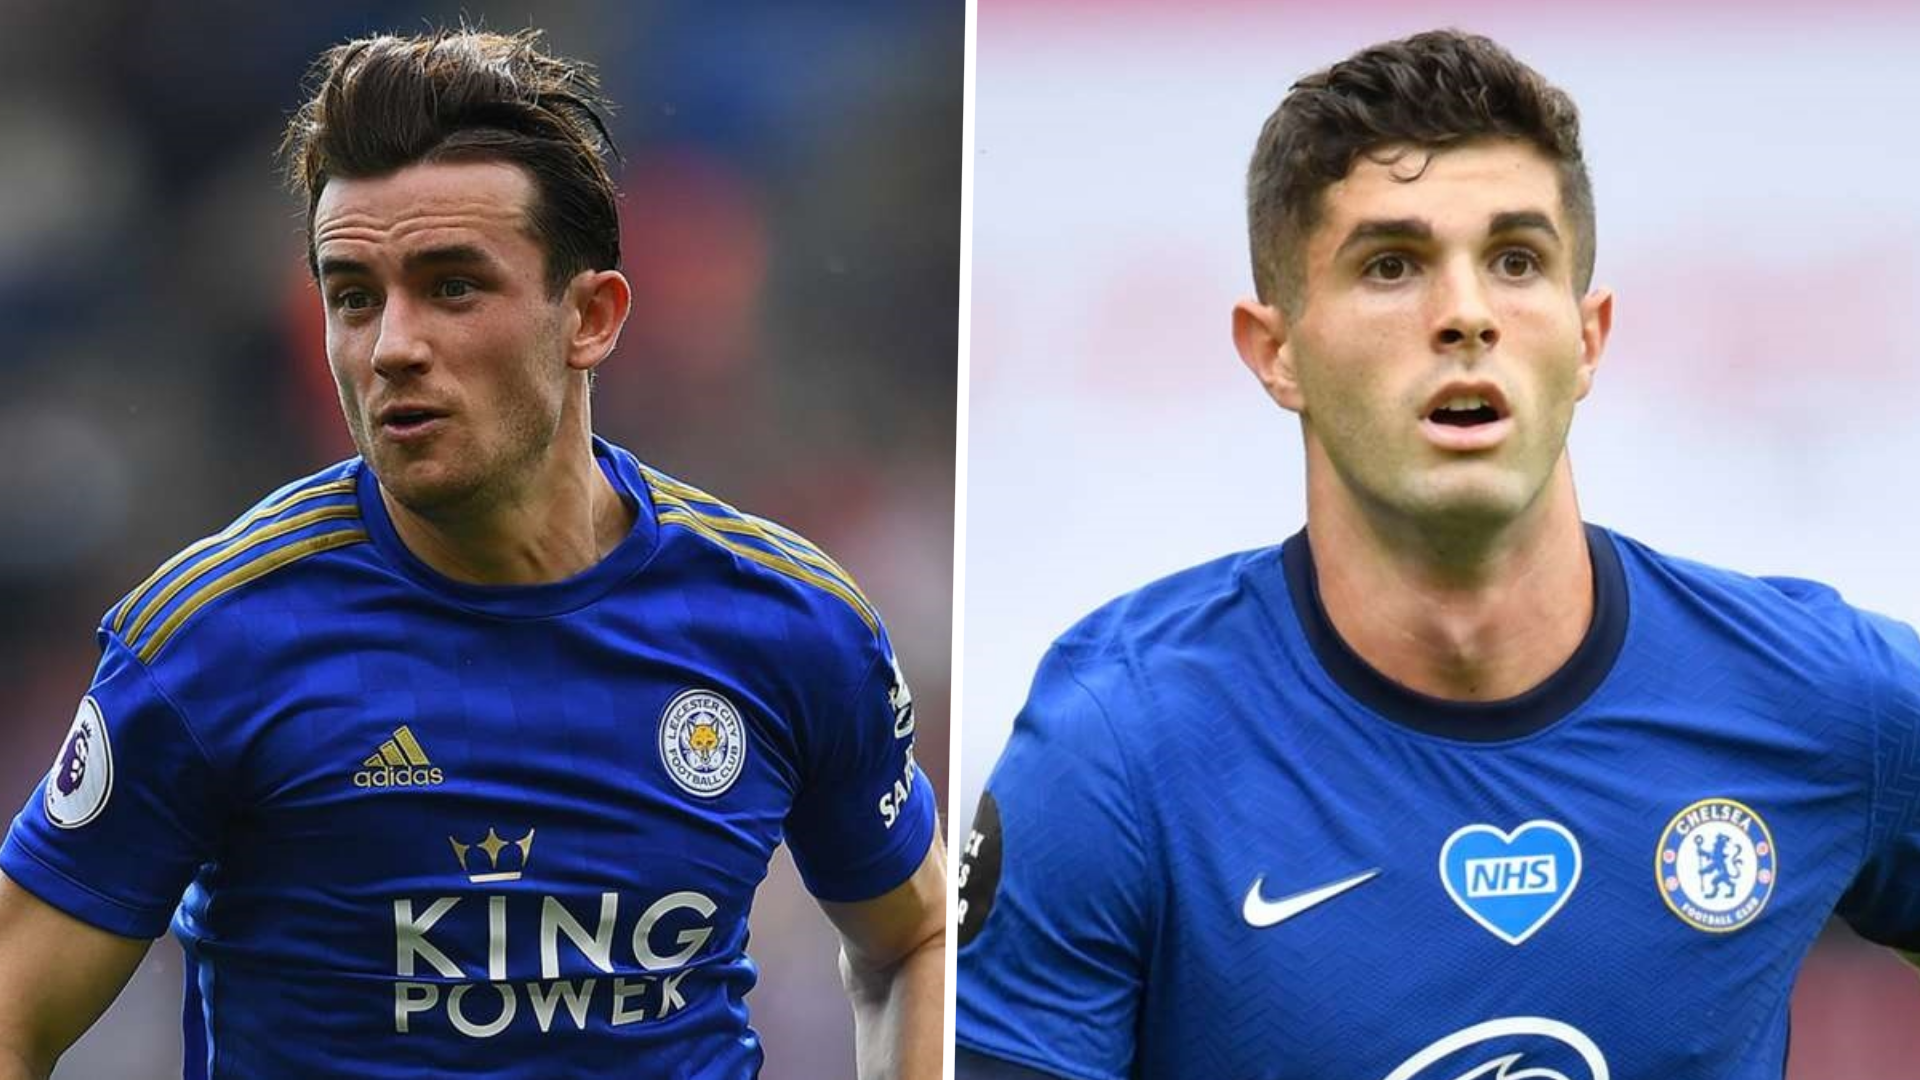 Chilwell and Pulisic could form an 'extraordinary partnership' at Chelsea, says Nevin